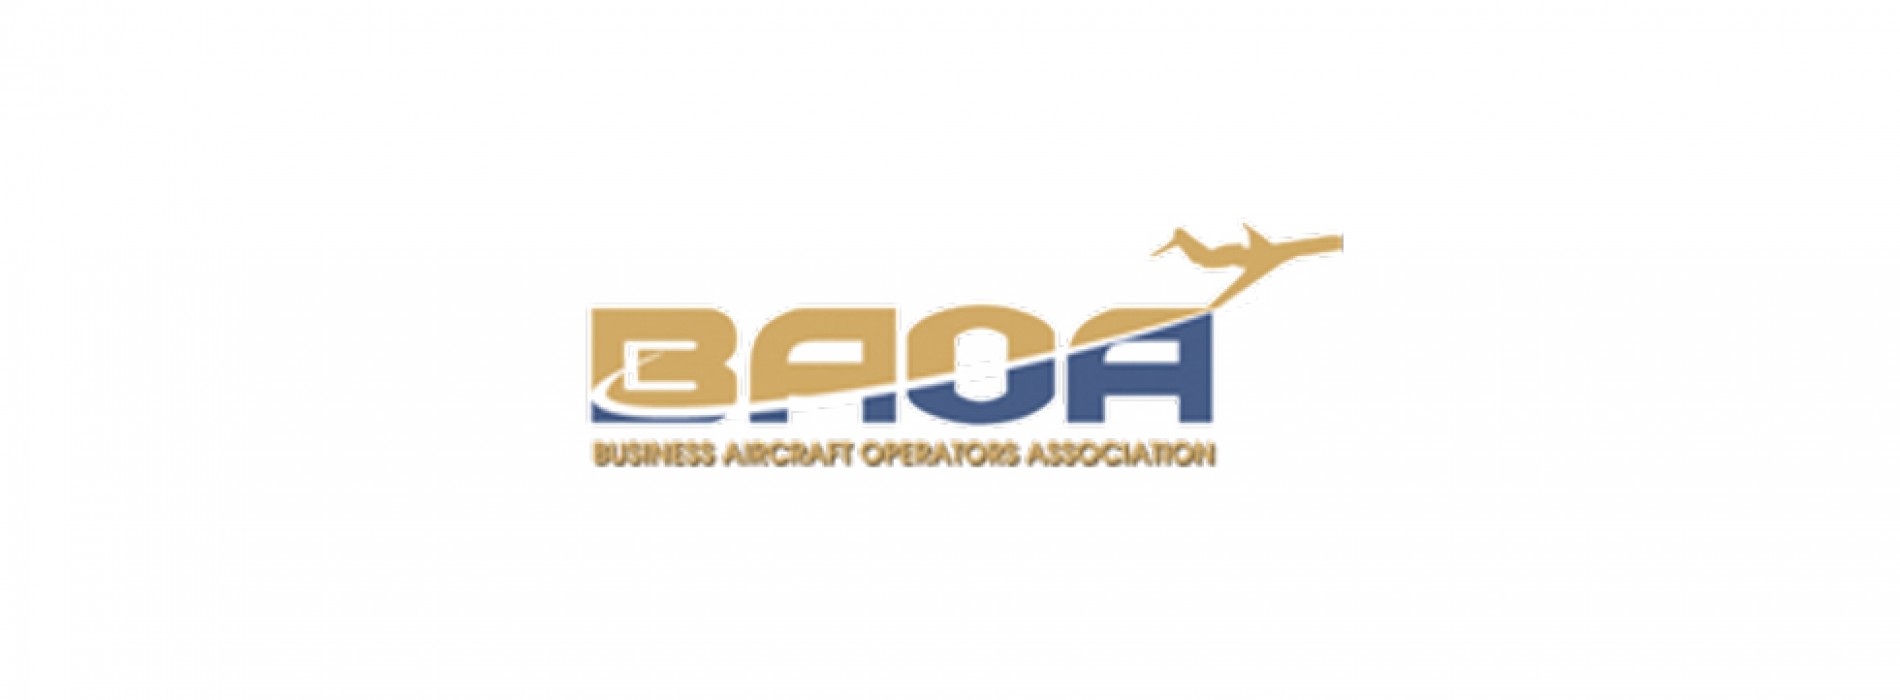 BAOA applauds Government’s move of relaxing clearance norms for Business Aviation